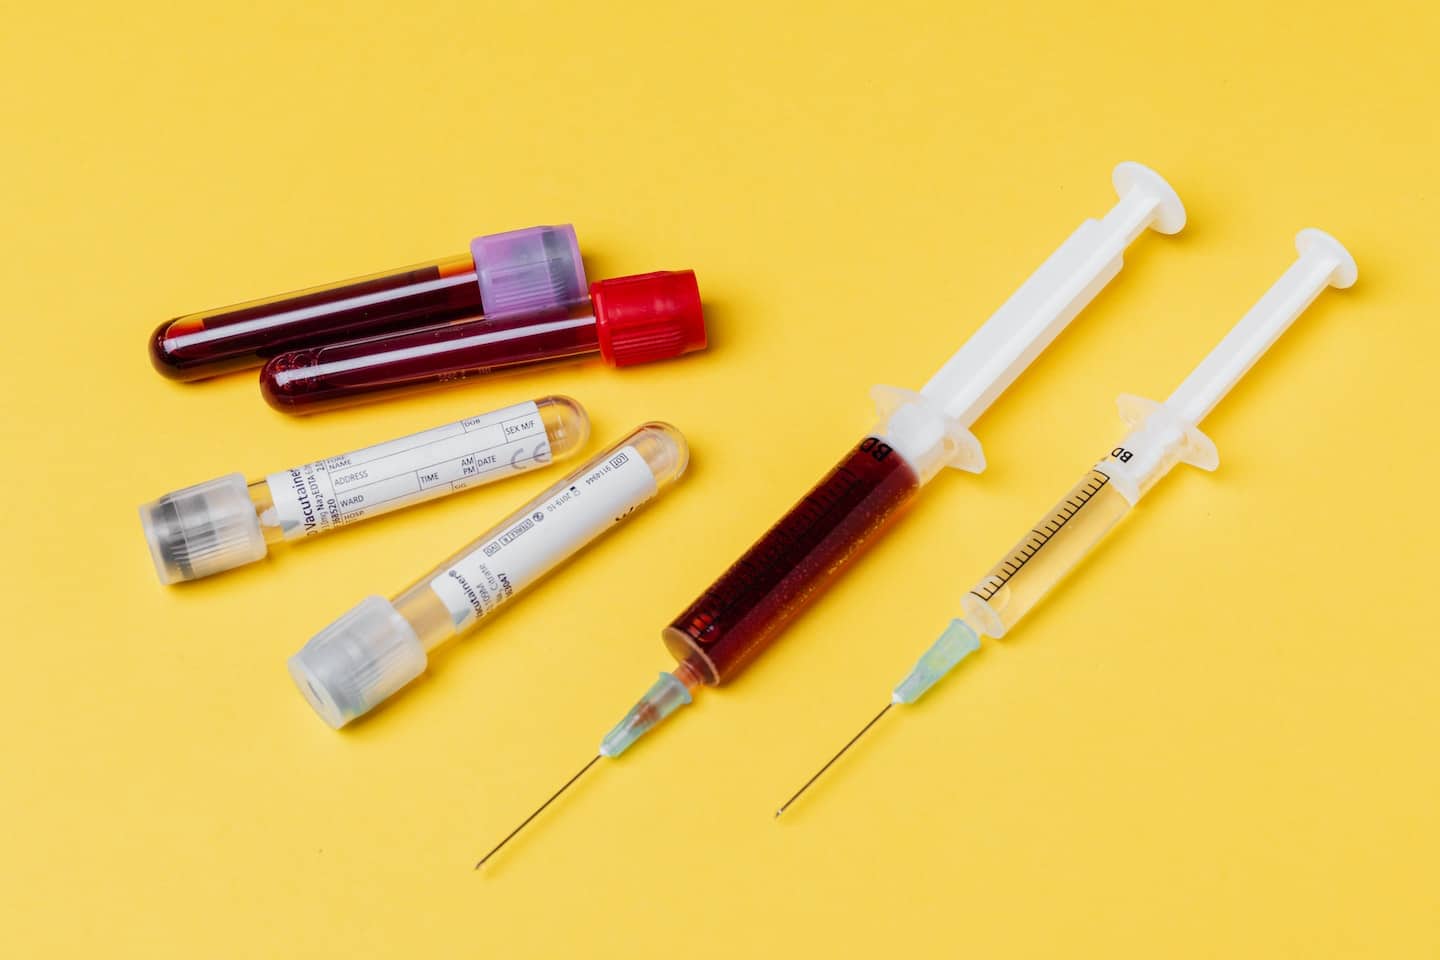 vials and hypodermic needs filled with blood samples